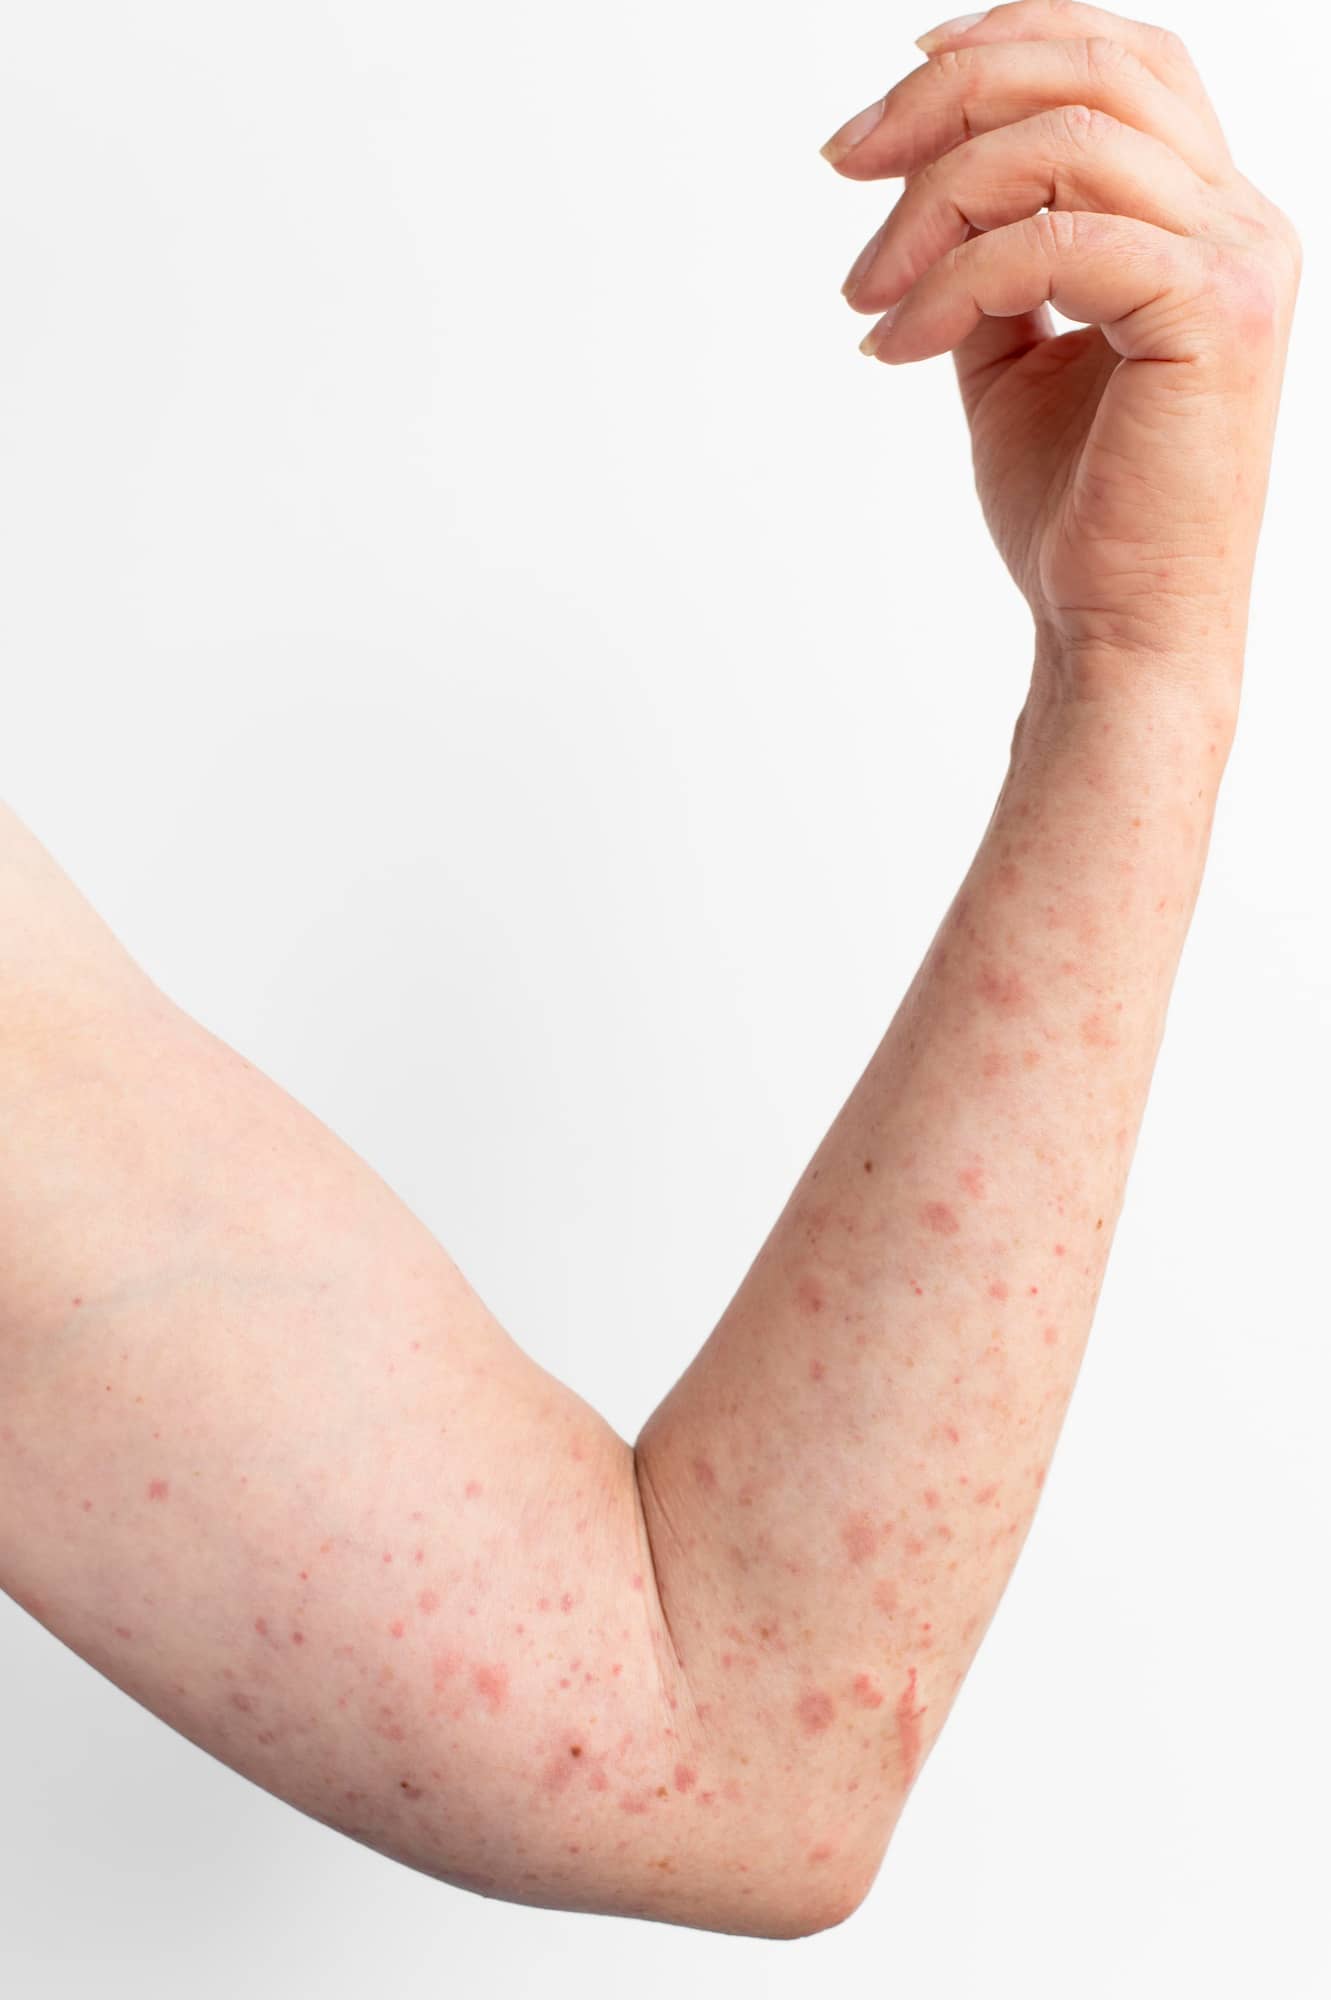 Kids With Eczema May Need More Allergy Testing, Study Says